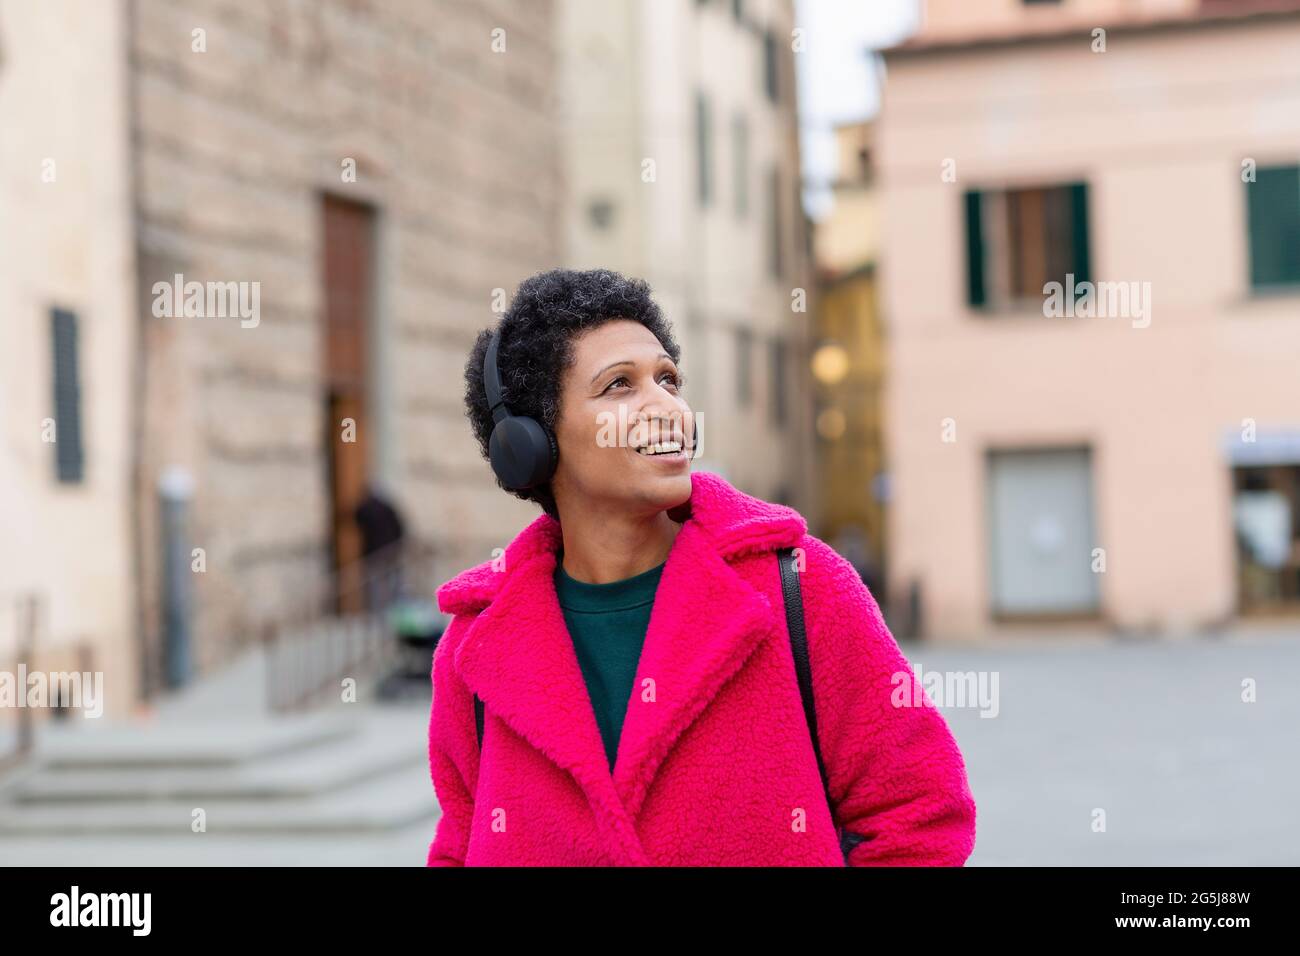 Italy, Tuscany, Pistoia, Woman in pink coat and headphones walking through city Stock Photo